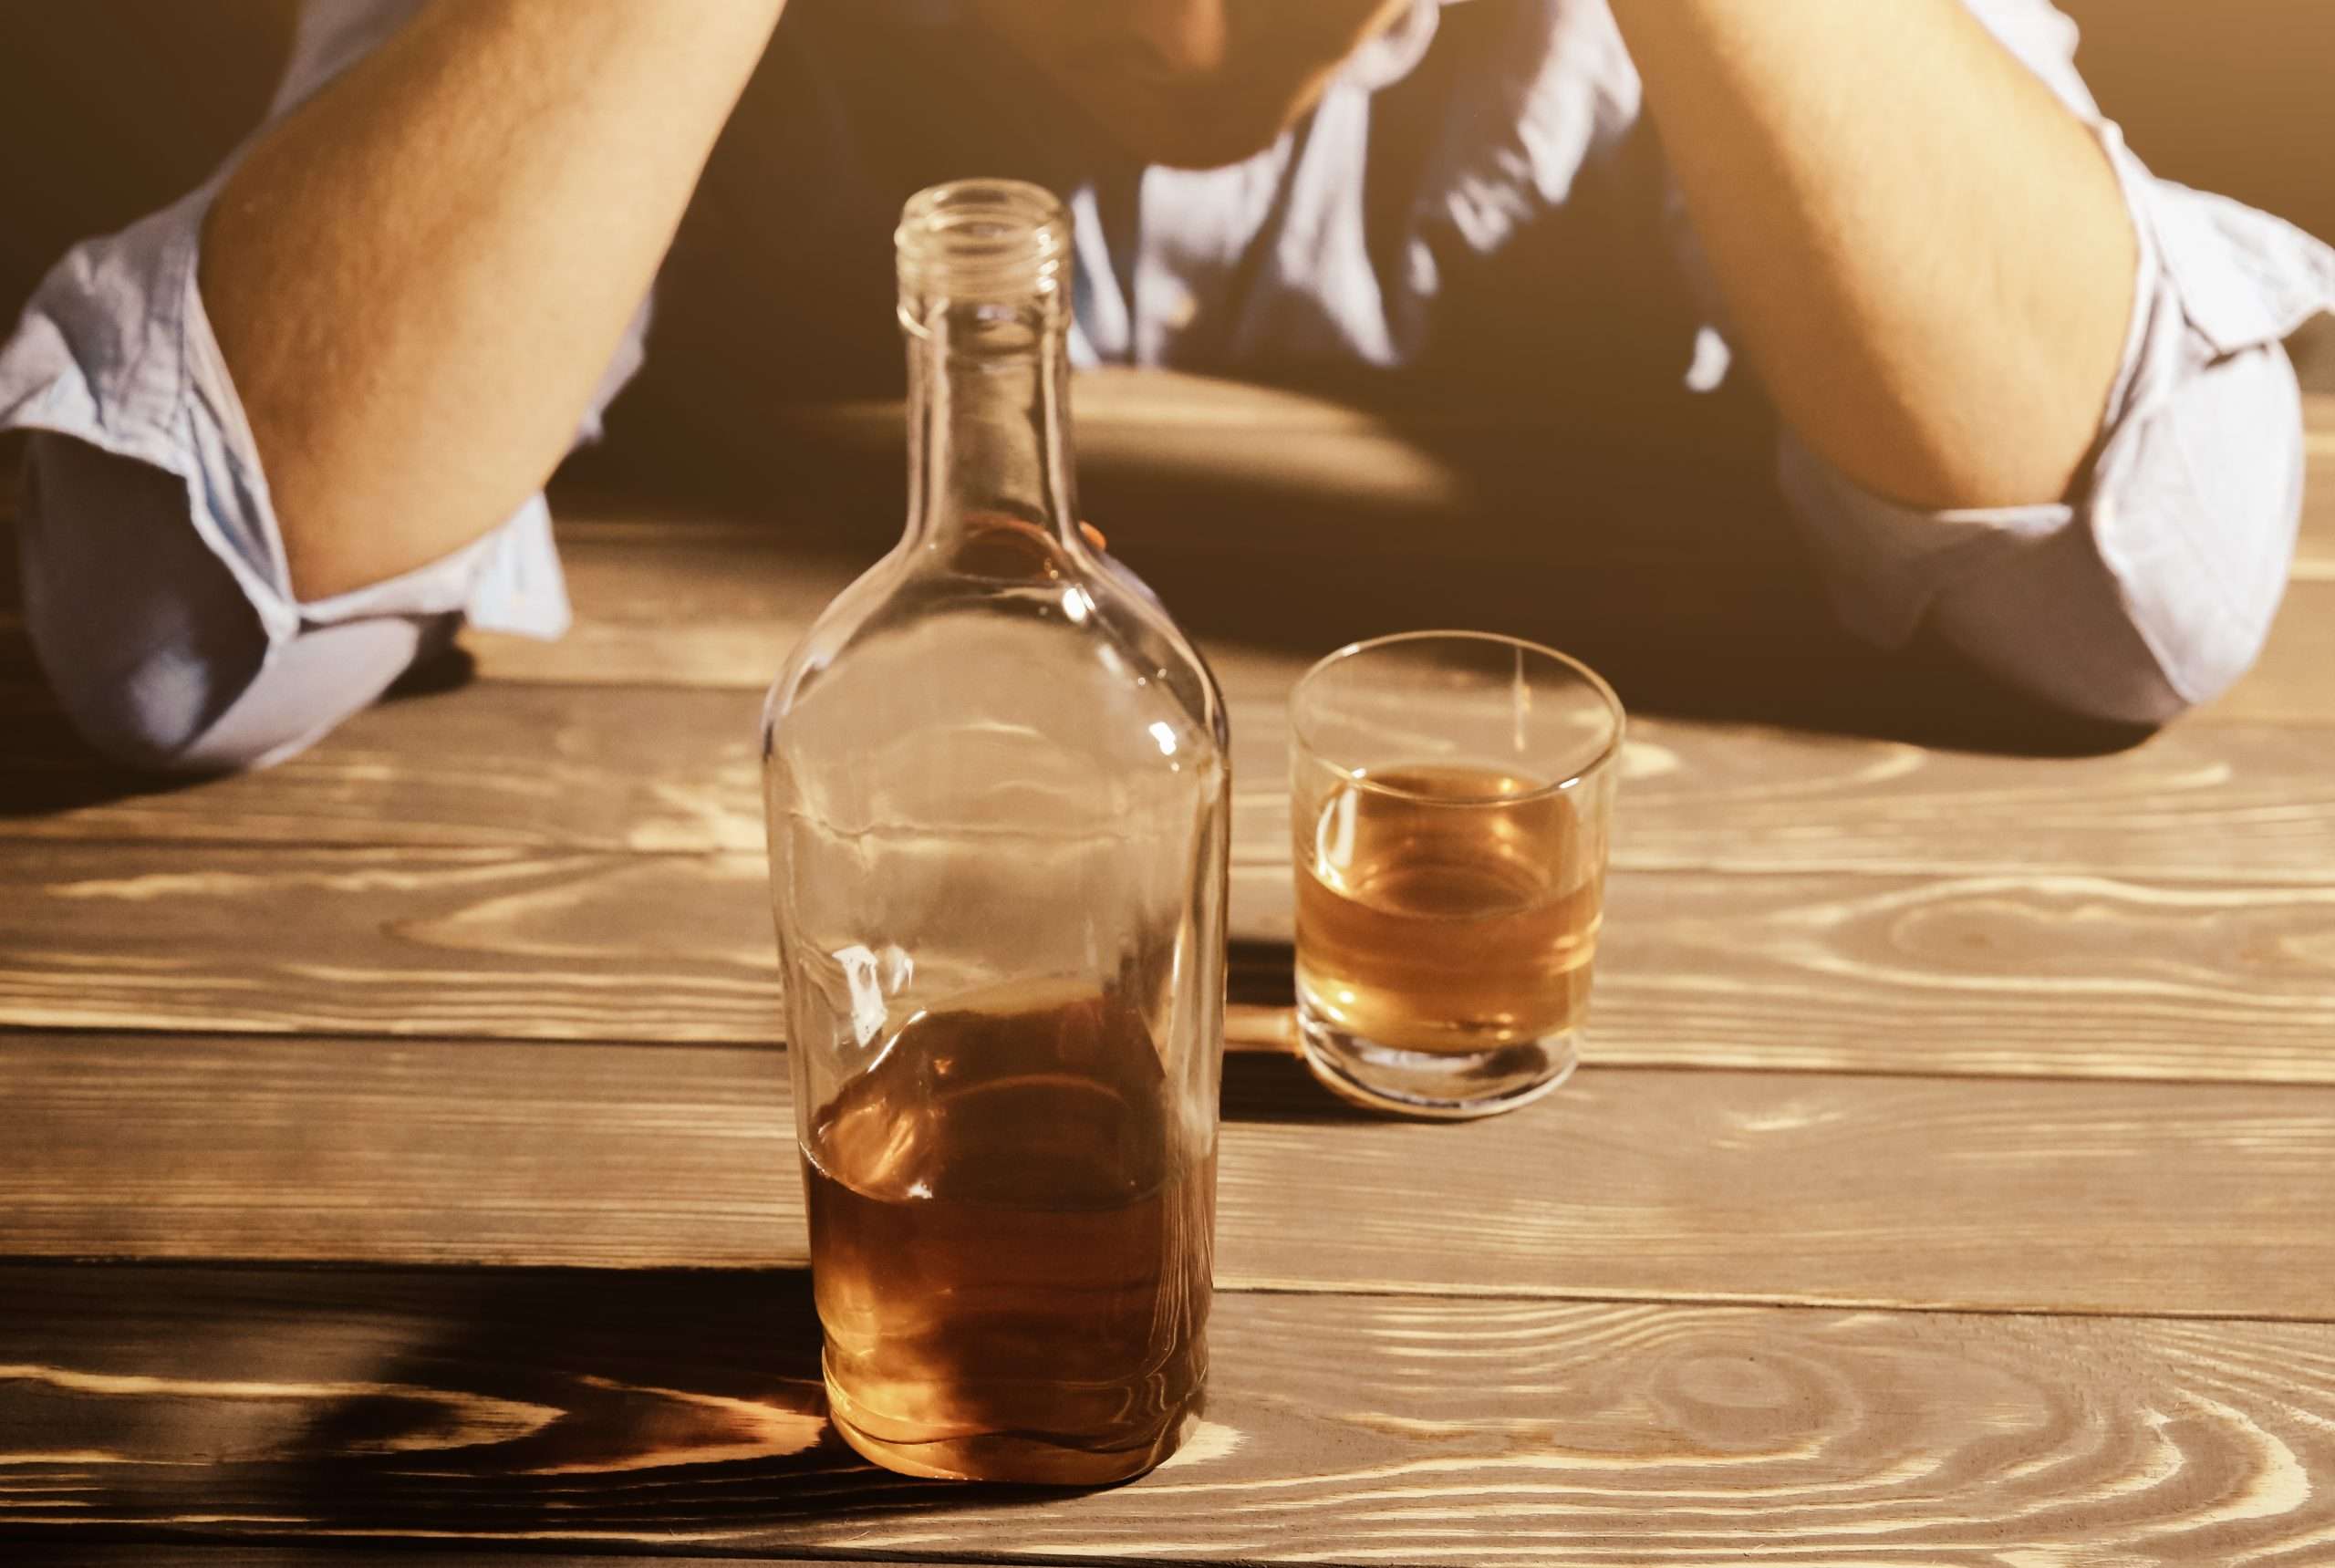 How to Know if Alcohol Abuse is Already a Problem